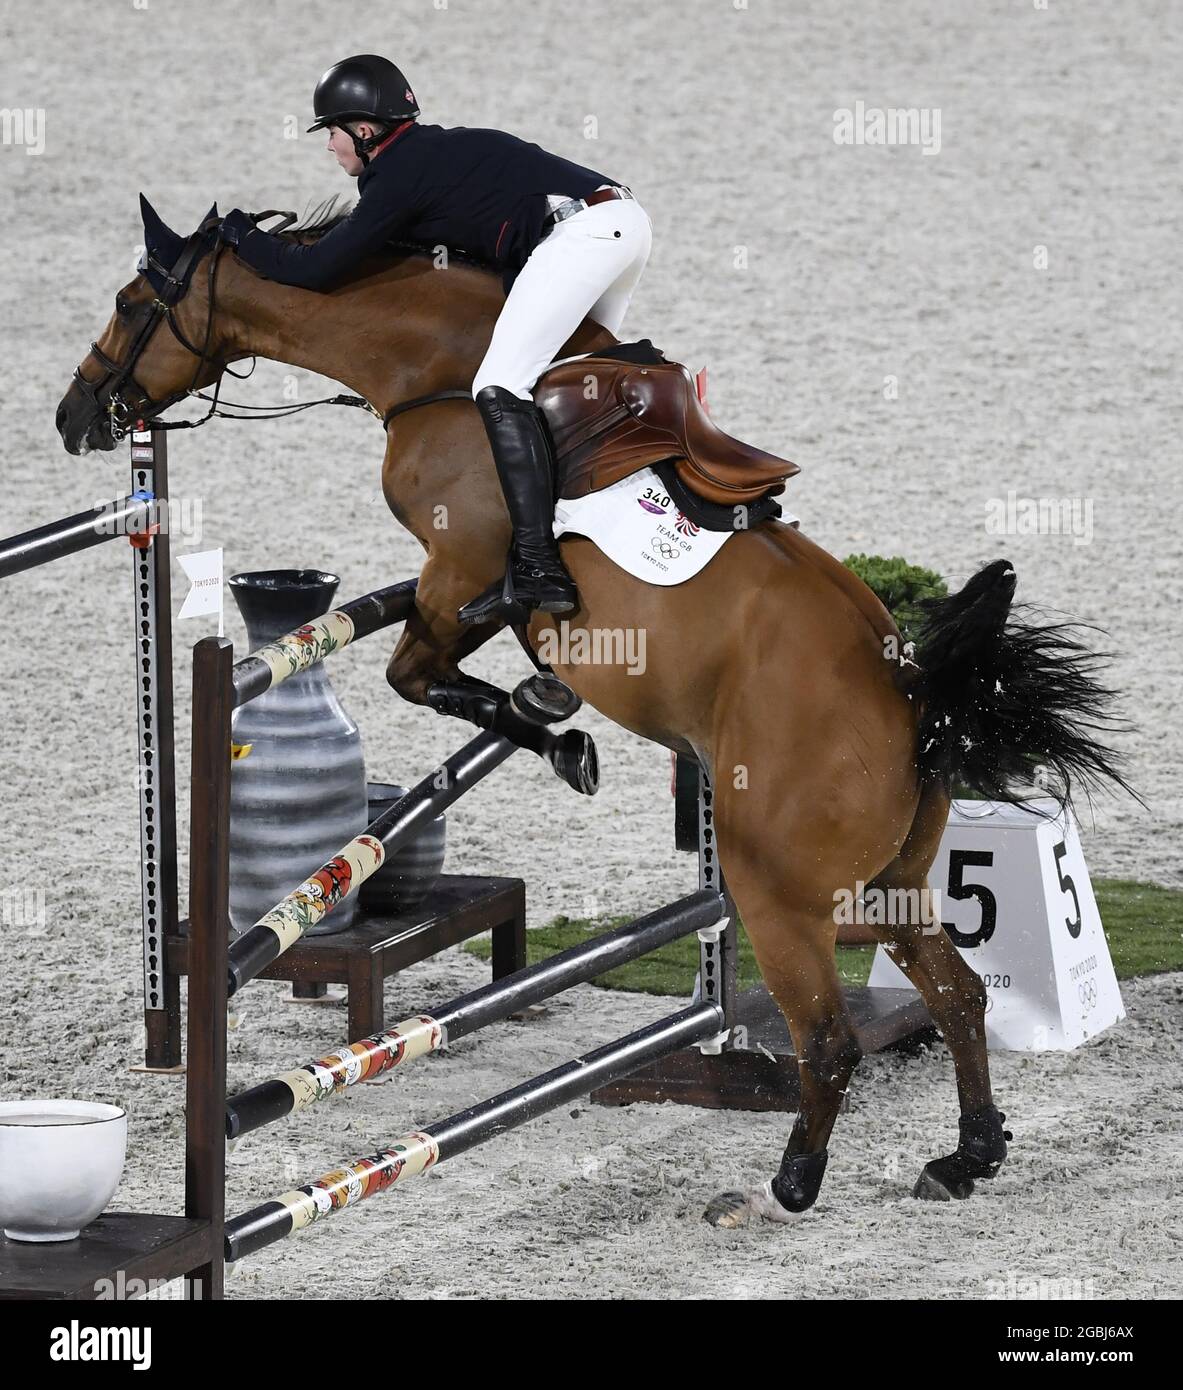 Tokyo, Japan. 04th Aug, 2021. Great Britain's Harry Charles, on Romeo 88, is sent out of the saddle as his horse crashes into the rails during the Equestrian Individual Jumping competition at the Tokyo 2020 Olympics, Wednesday, August 4, 2021 in Tokyo, Japan. Photo by Mike Theiler/UPI Credit: UPI/Alamy Live News Stock Photo